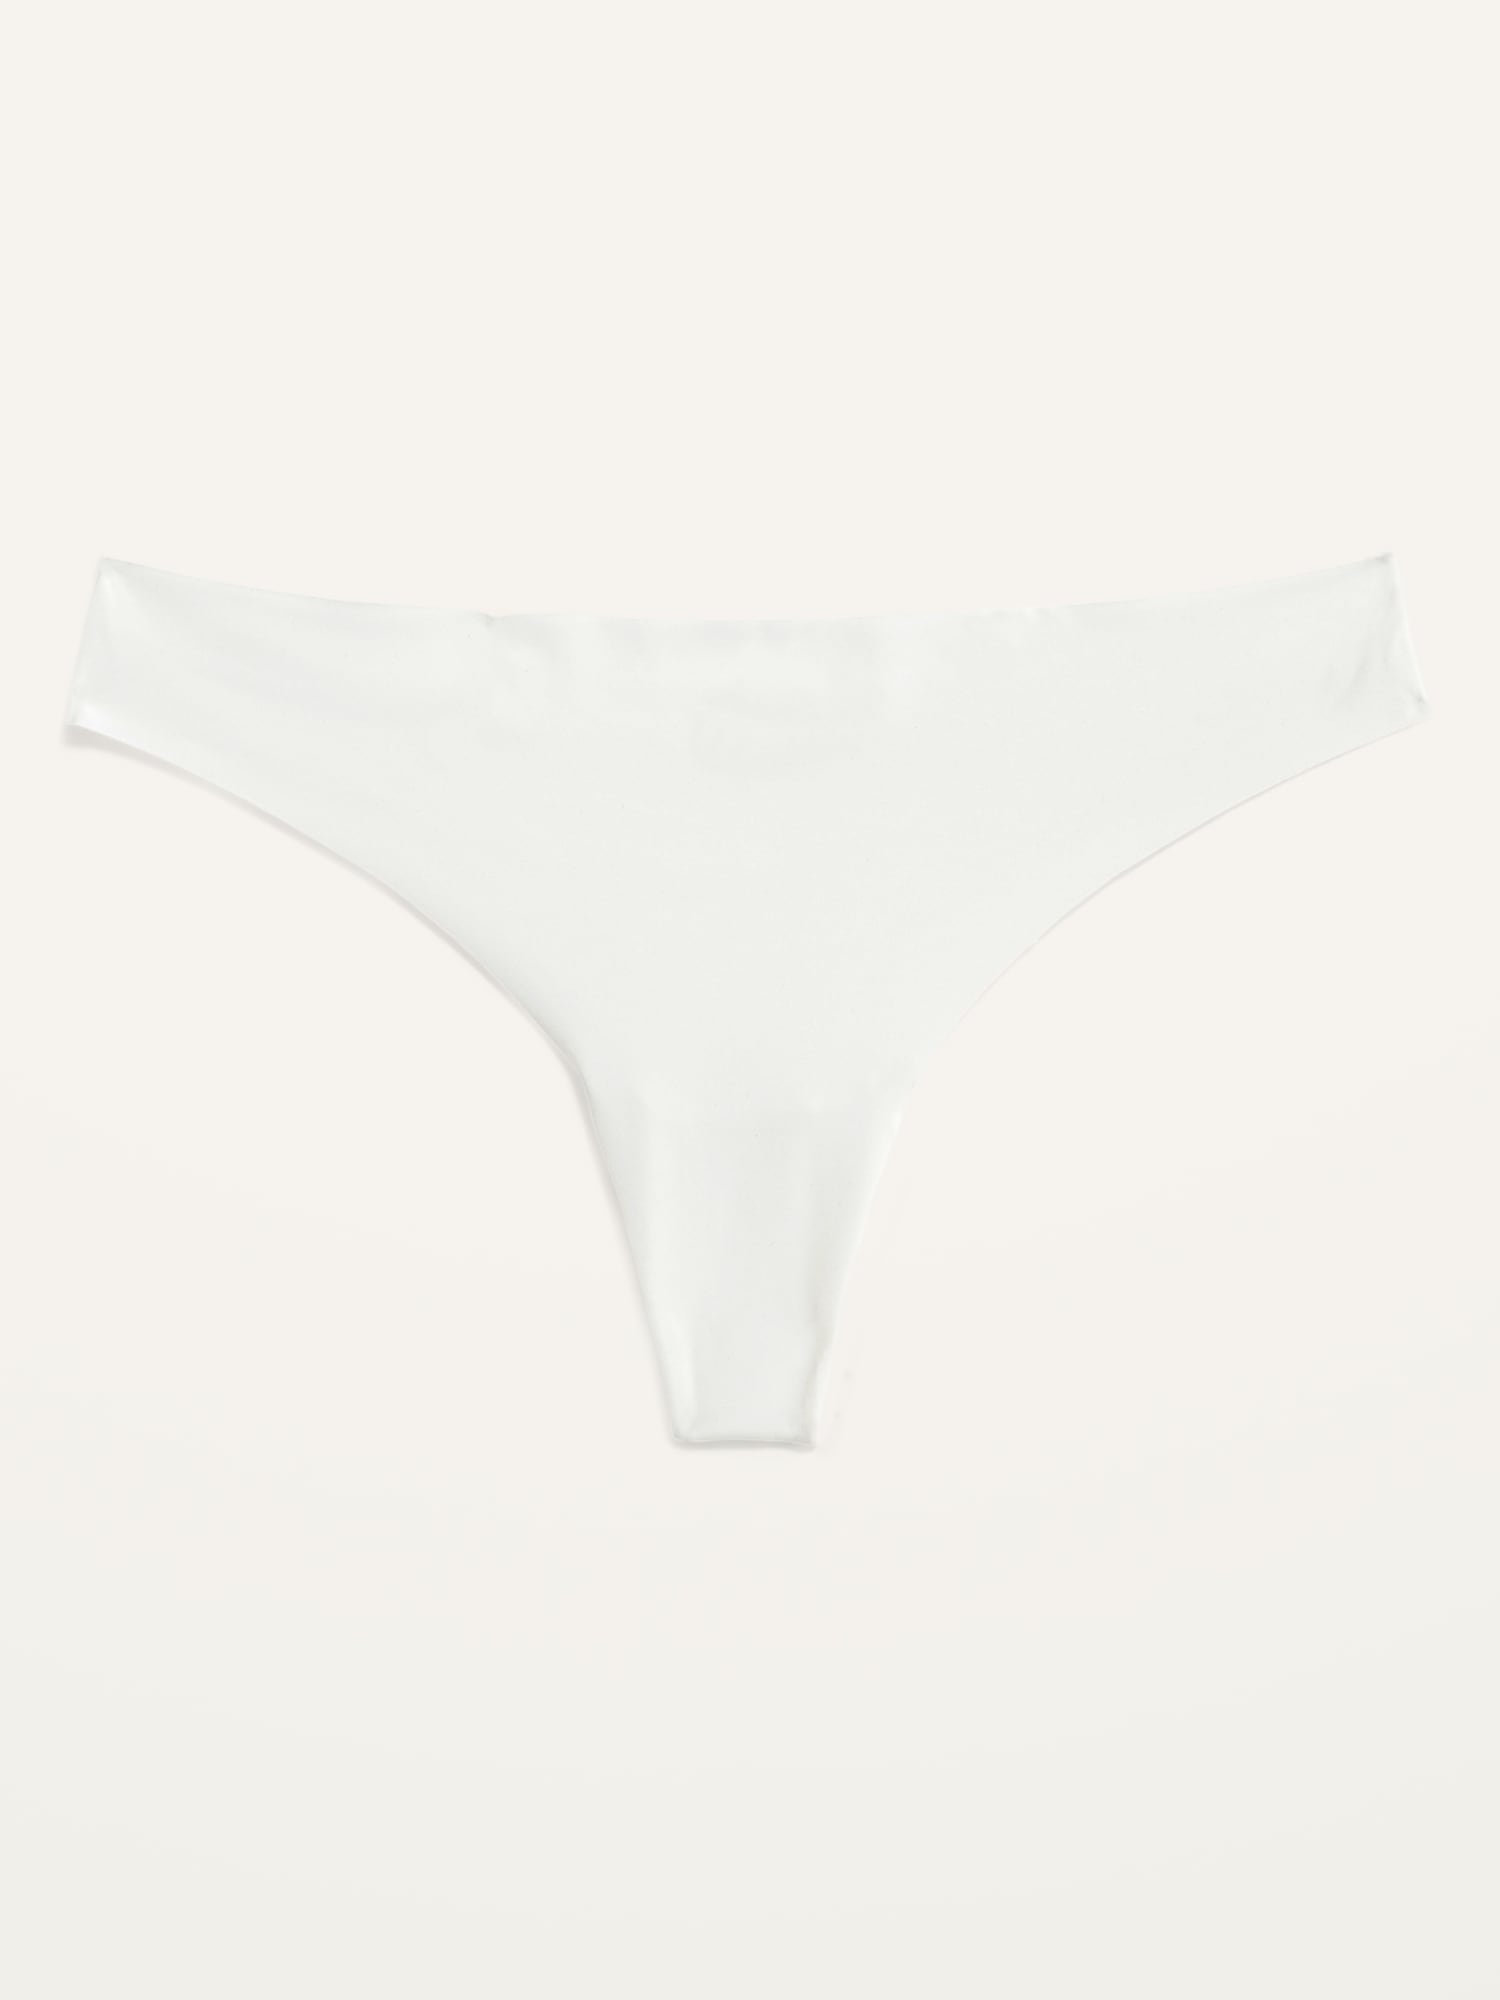 Soft-Knit No-Show Thong Underwear for Women